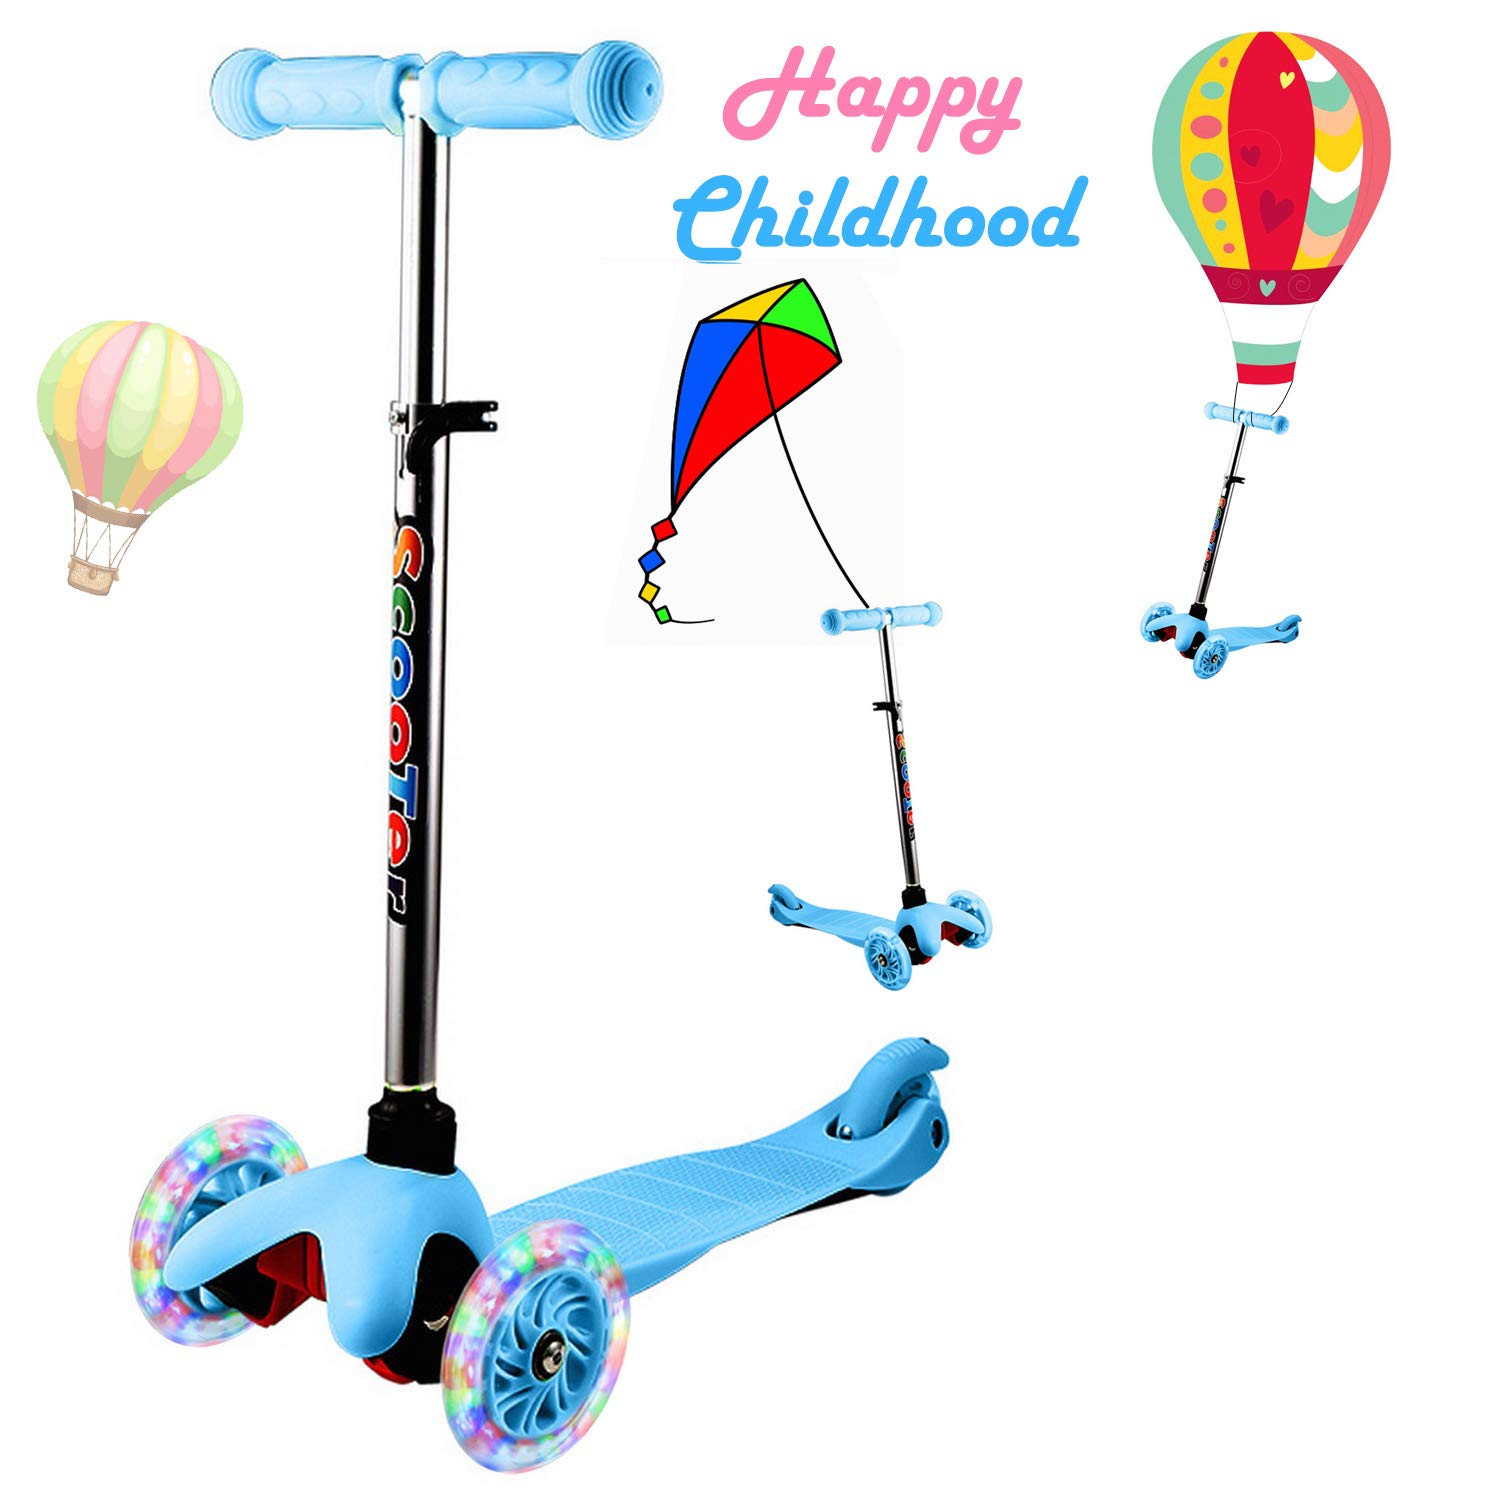 Kick Scooter for Kids with 3 PU LED Light up Wheels Adjustable Height Lean to Steer Extra Wide Deck Scooter Gift for Girls Boys Toddlers Age 3 up